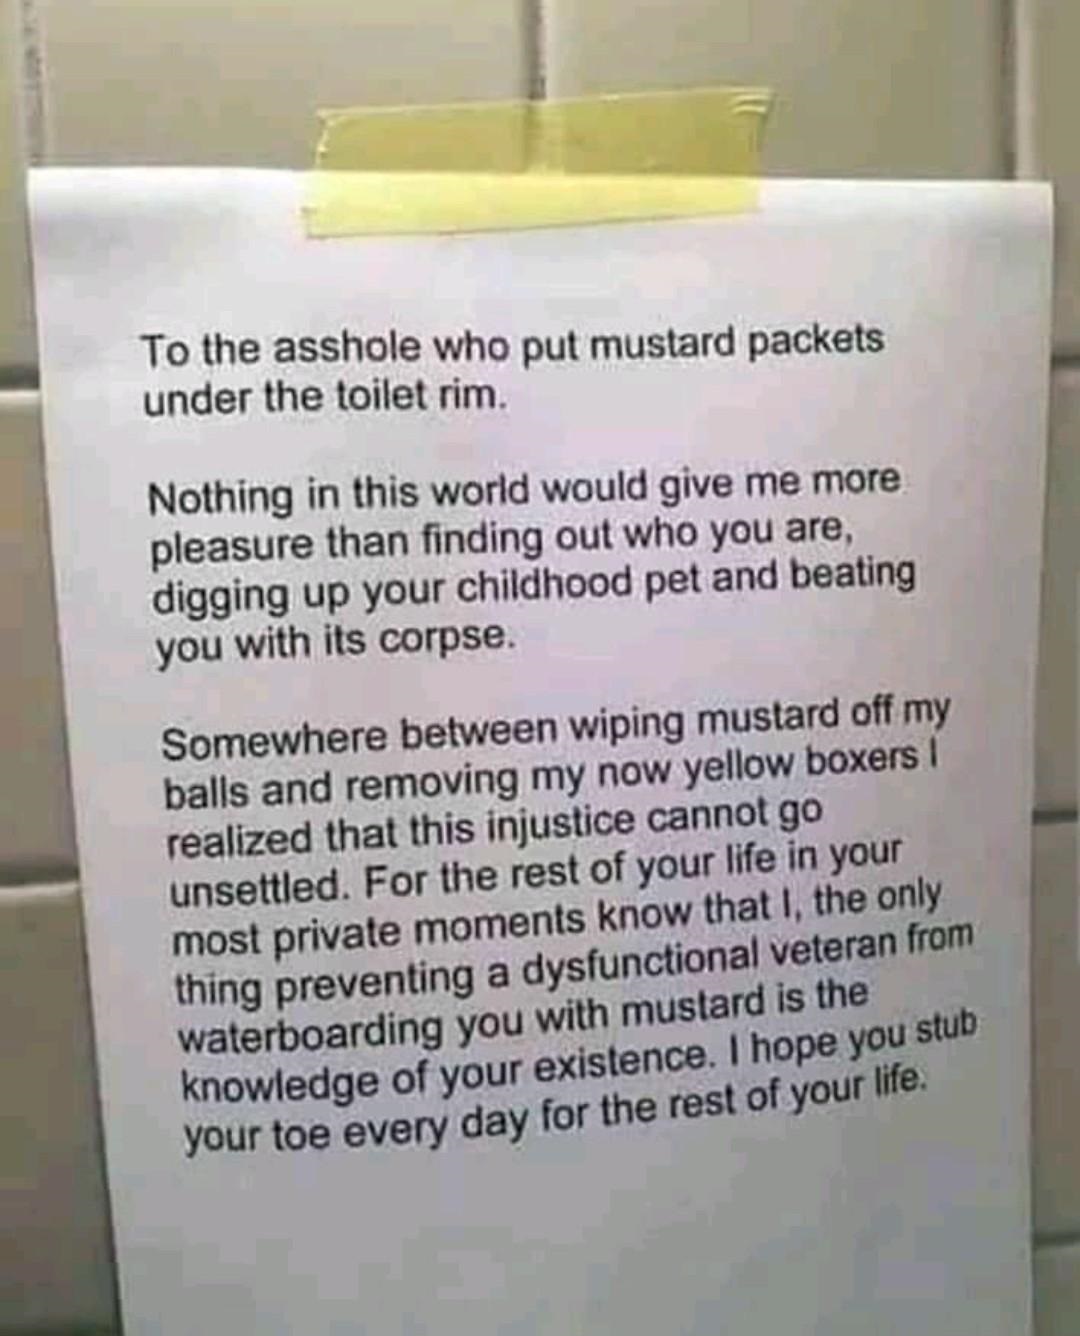 mustard packet meme - To the asshole who put mustard packets under the toilet rim. Nothing in this world would give me more pleasure than finding out who you are, digging up your childhood pet and beating you with its corpse. Somewhere between wiping must